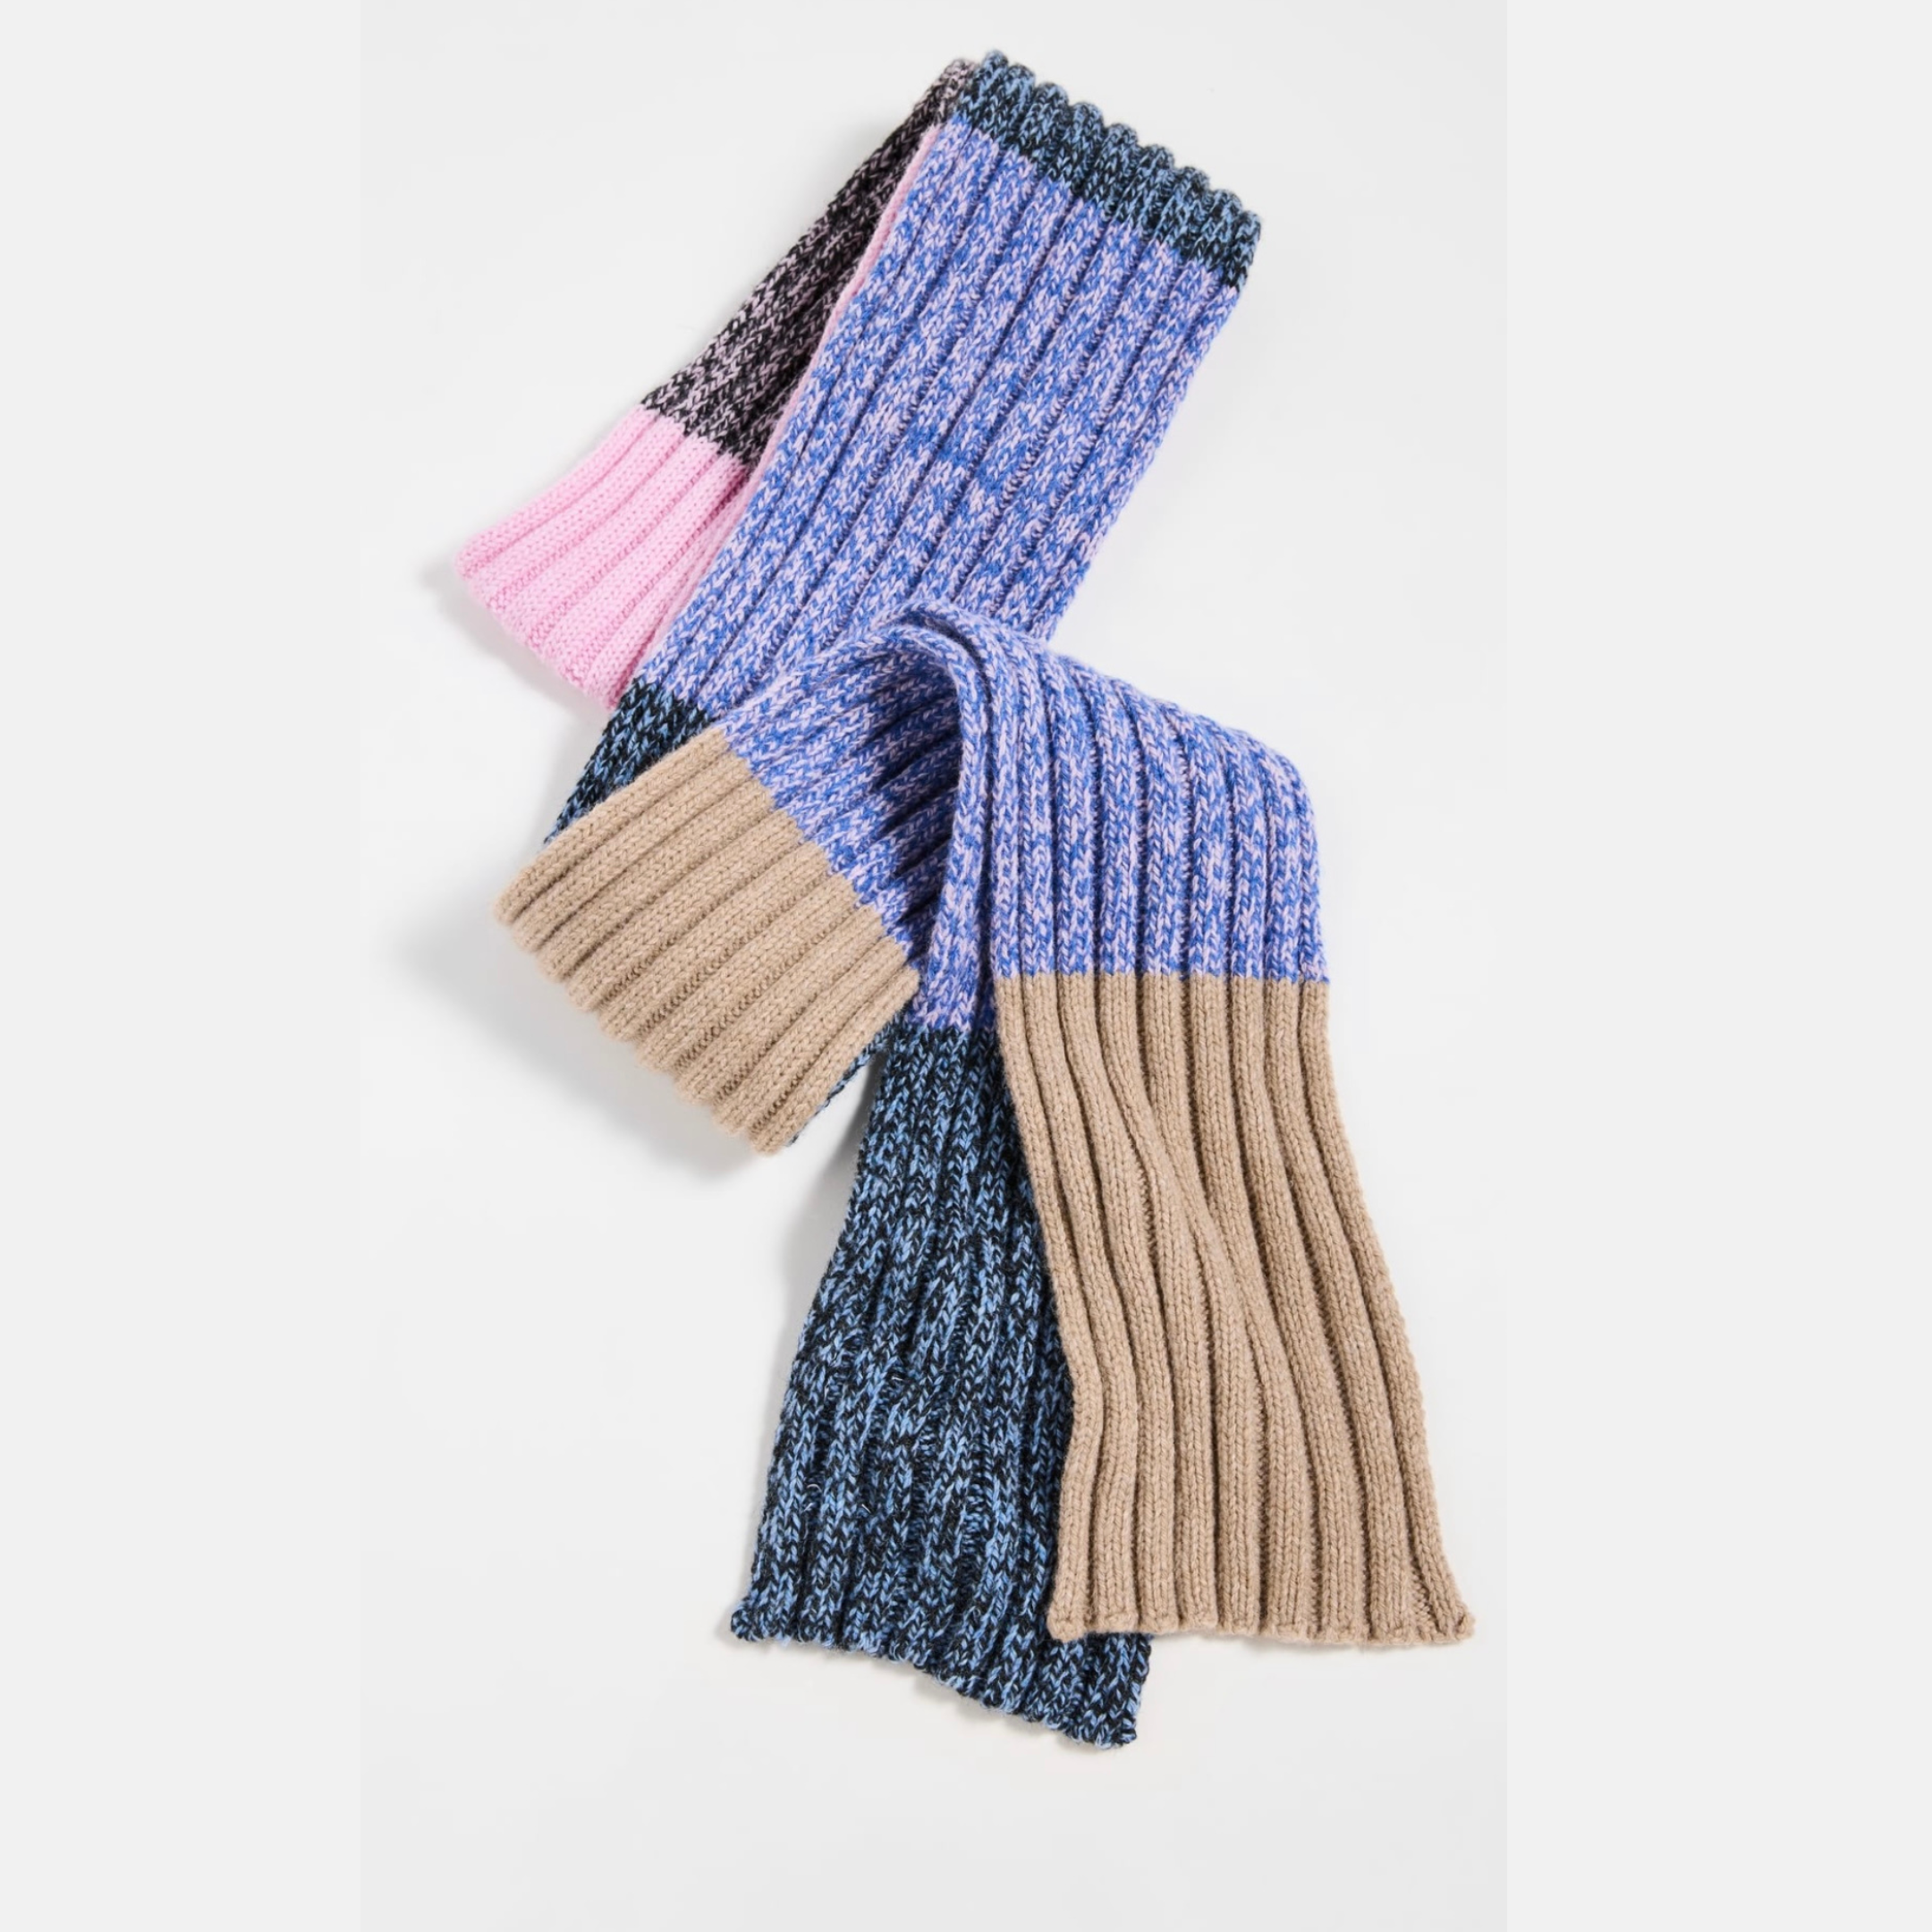 11 Scarves For All Your Fall And Winter Wardrobe Needs